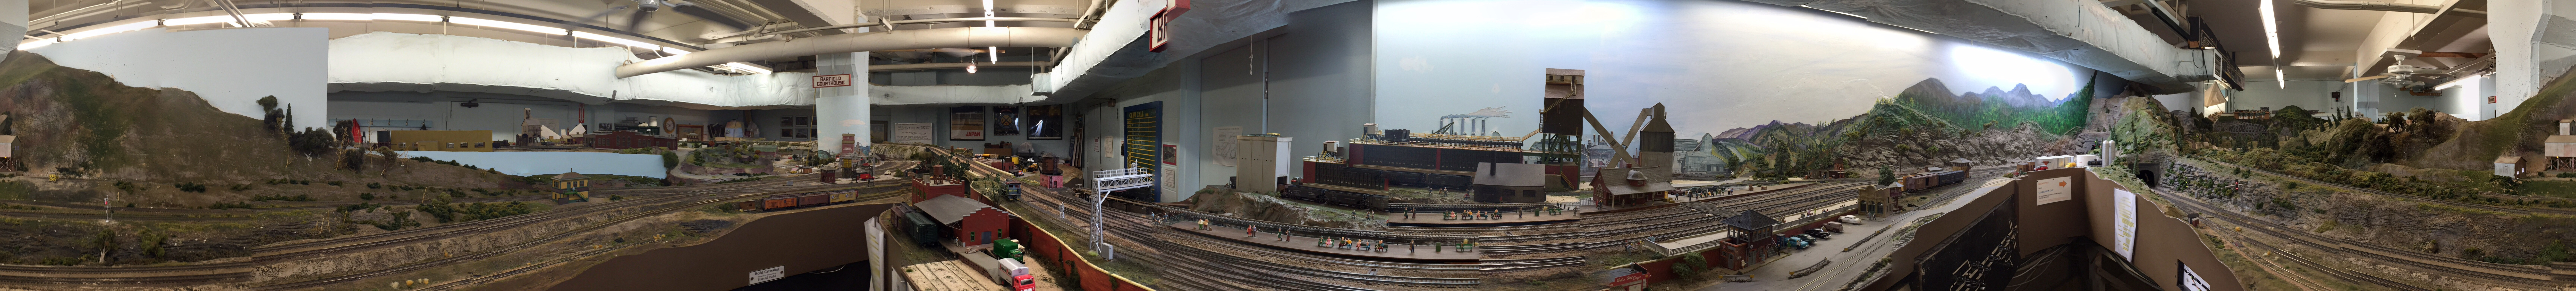 Overall photo of the Garfield-Central Layout